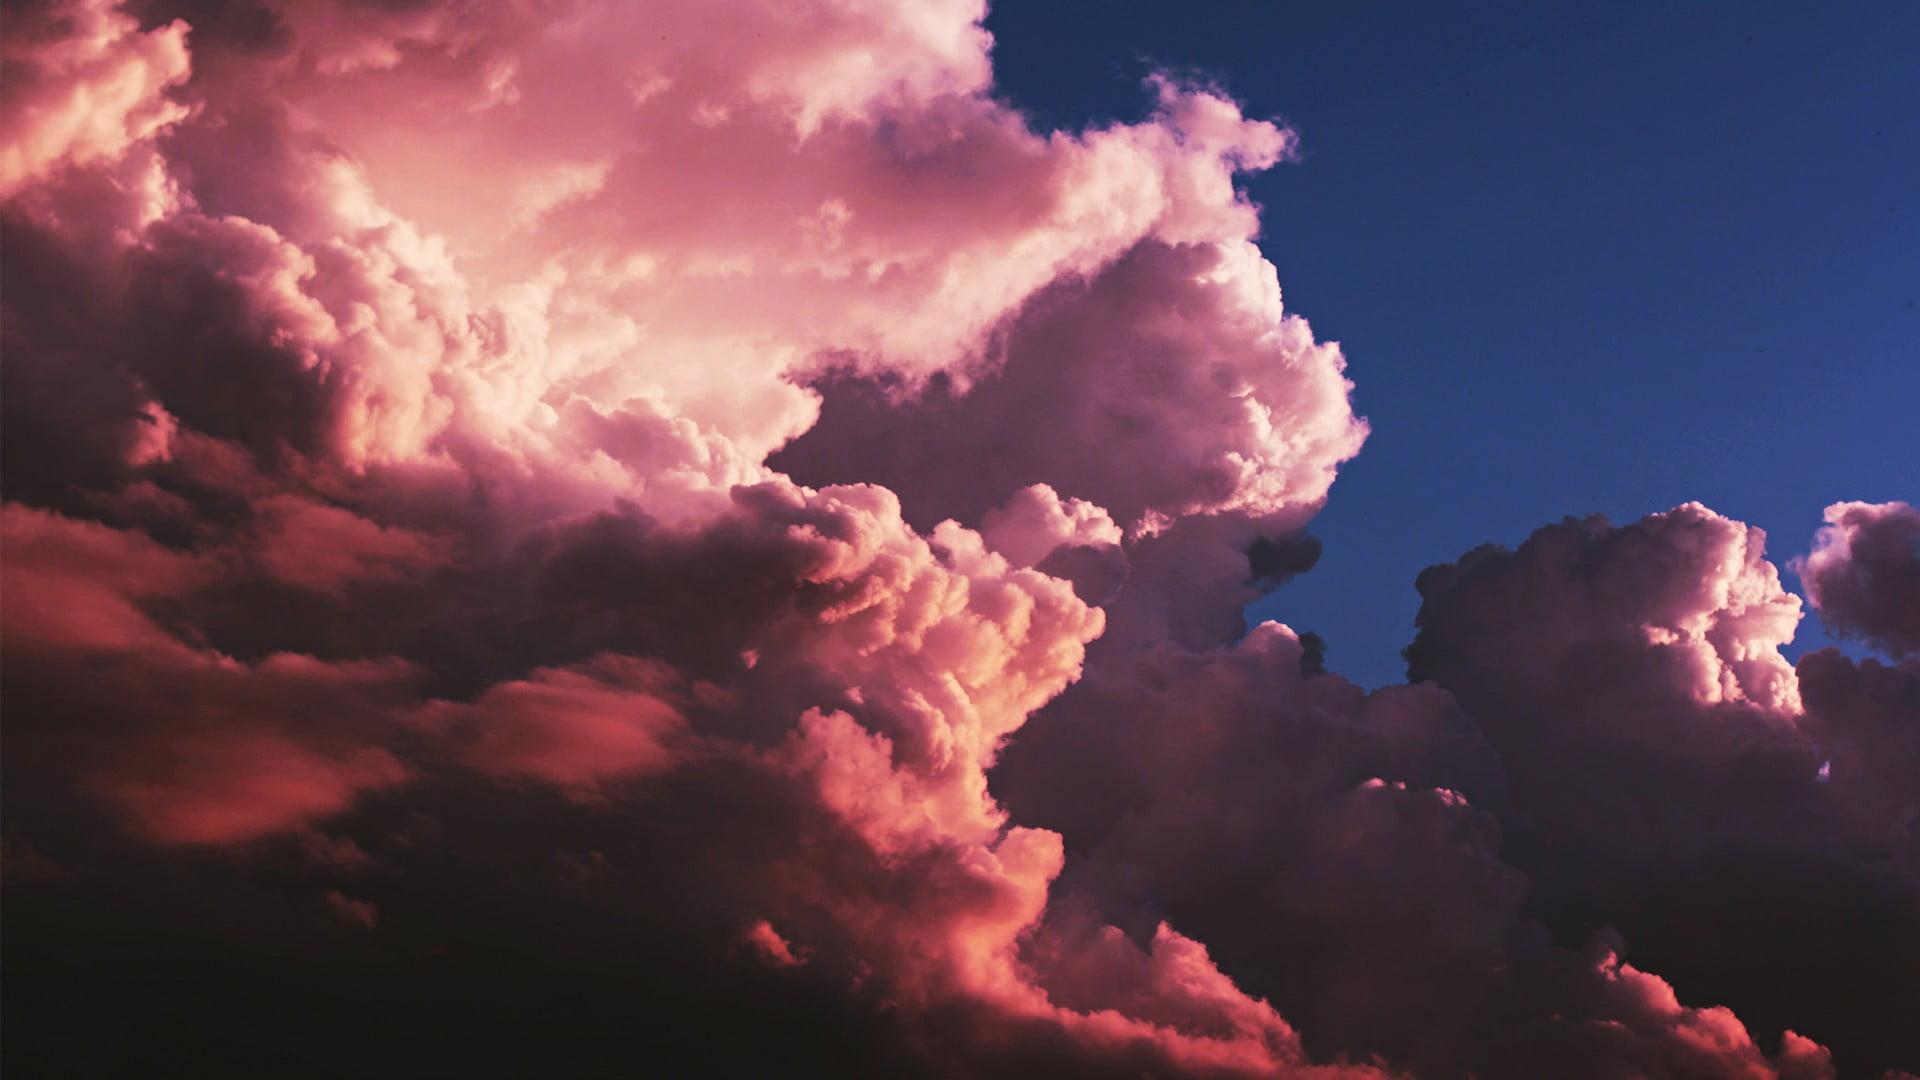 Aesthetic Cloud Backgrounds HD Free download.